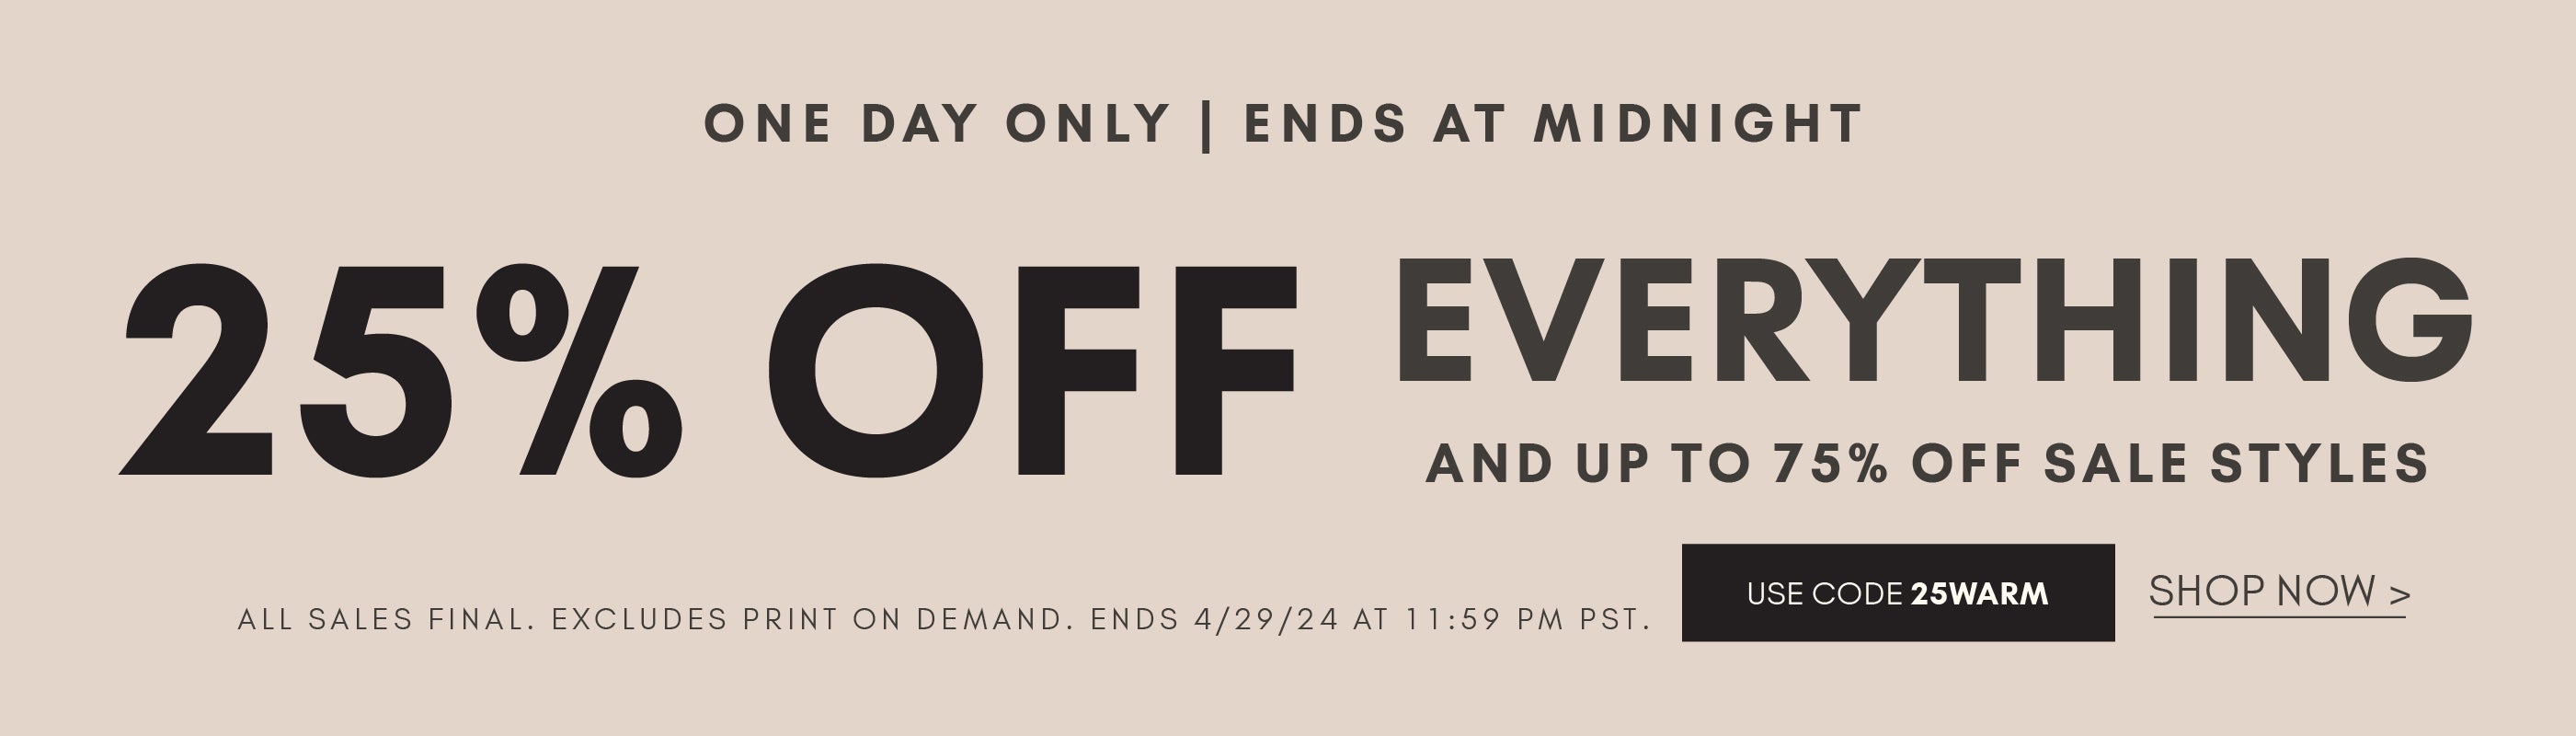 25% OFF everything. one day only. ends at midnight. use code 25WARM. All sales final. Excludes print on demand. Shop Now and links to new arrivals.